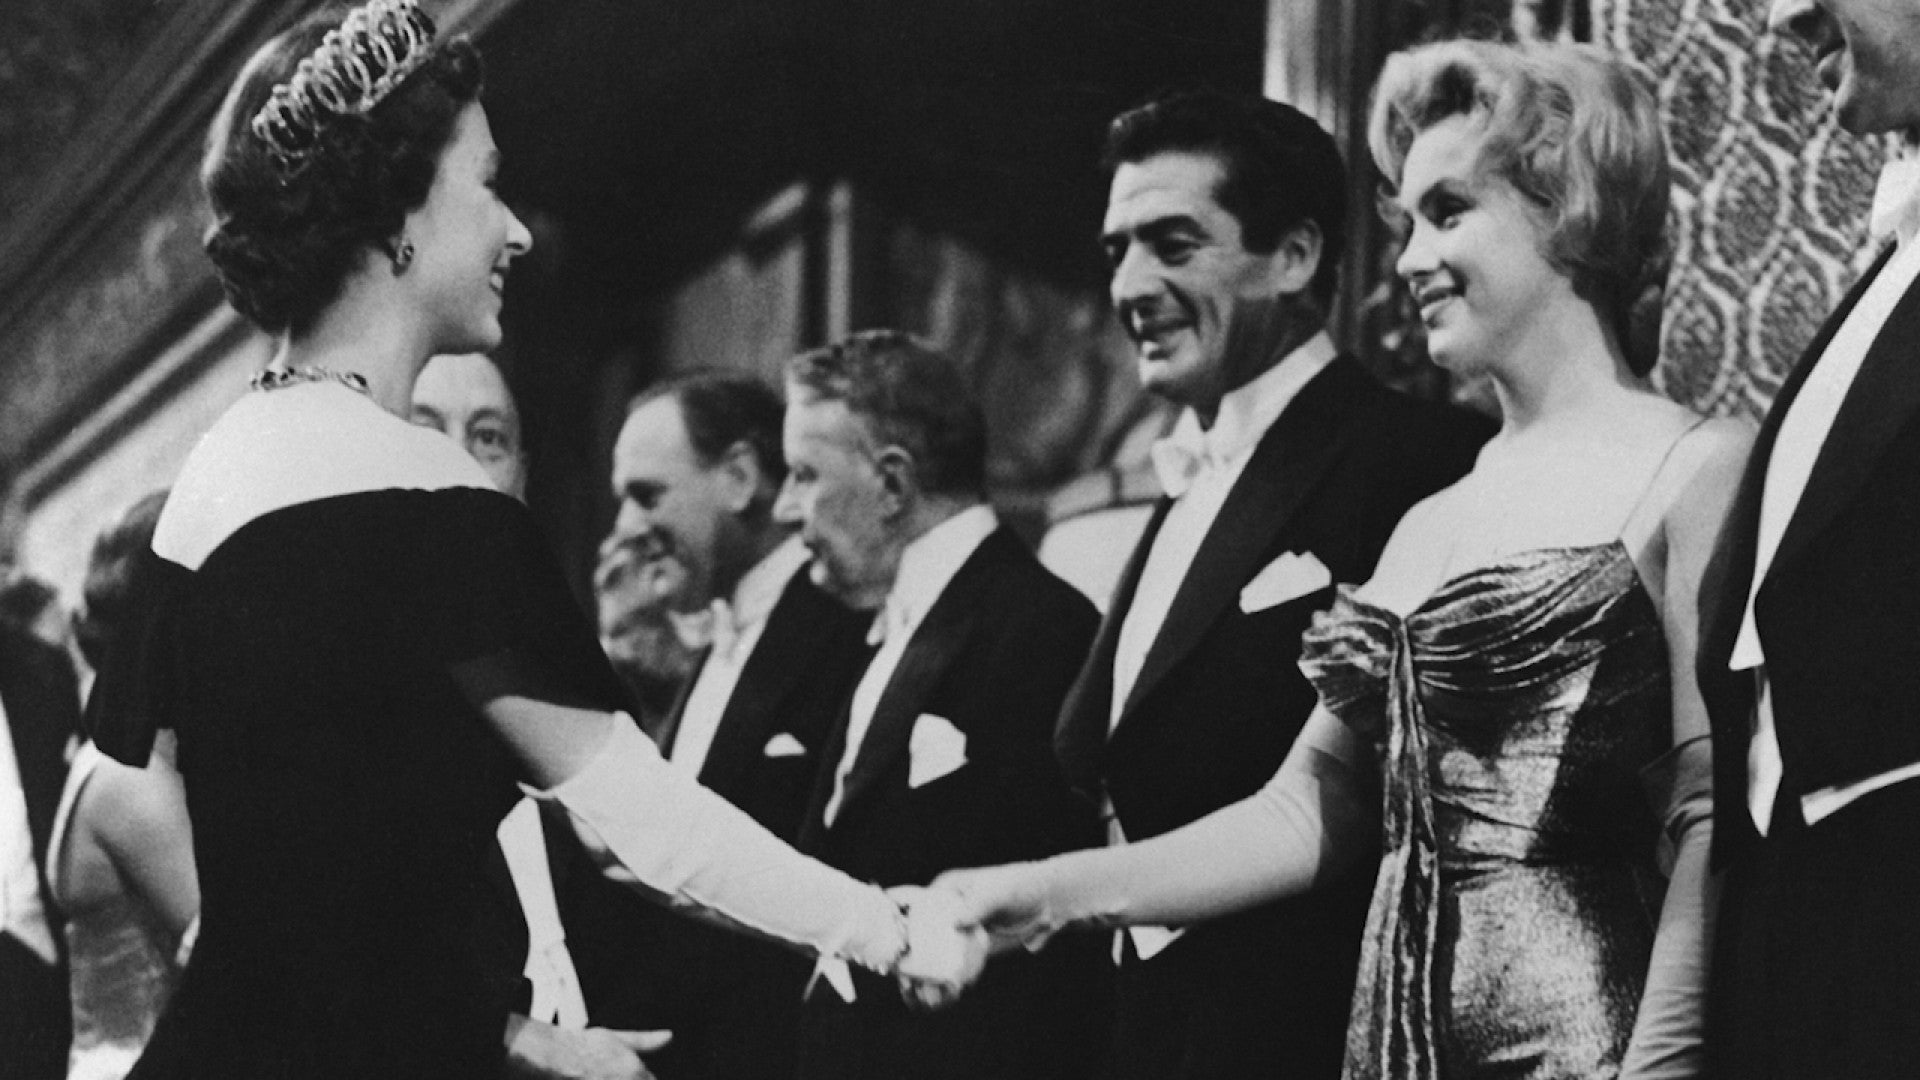 Marilyn Monroe Once Met The Queen At A Film Premiere In London See The Rare Regal Footage Entertainment Tonight